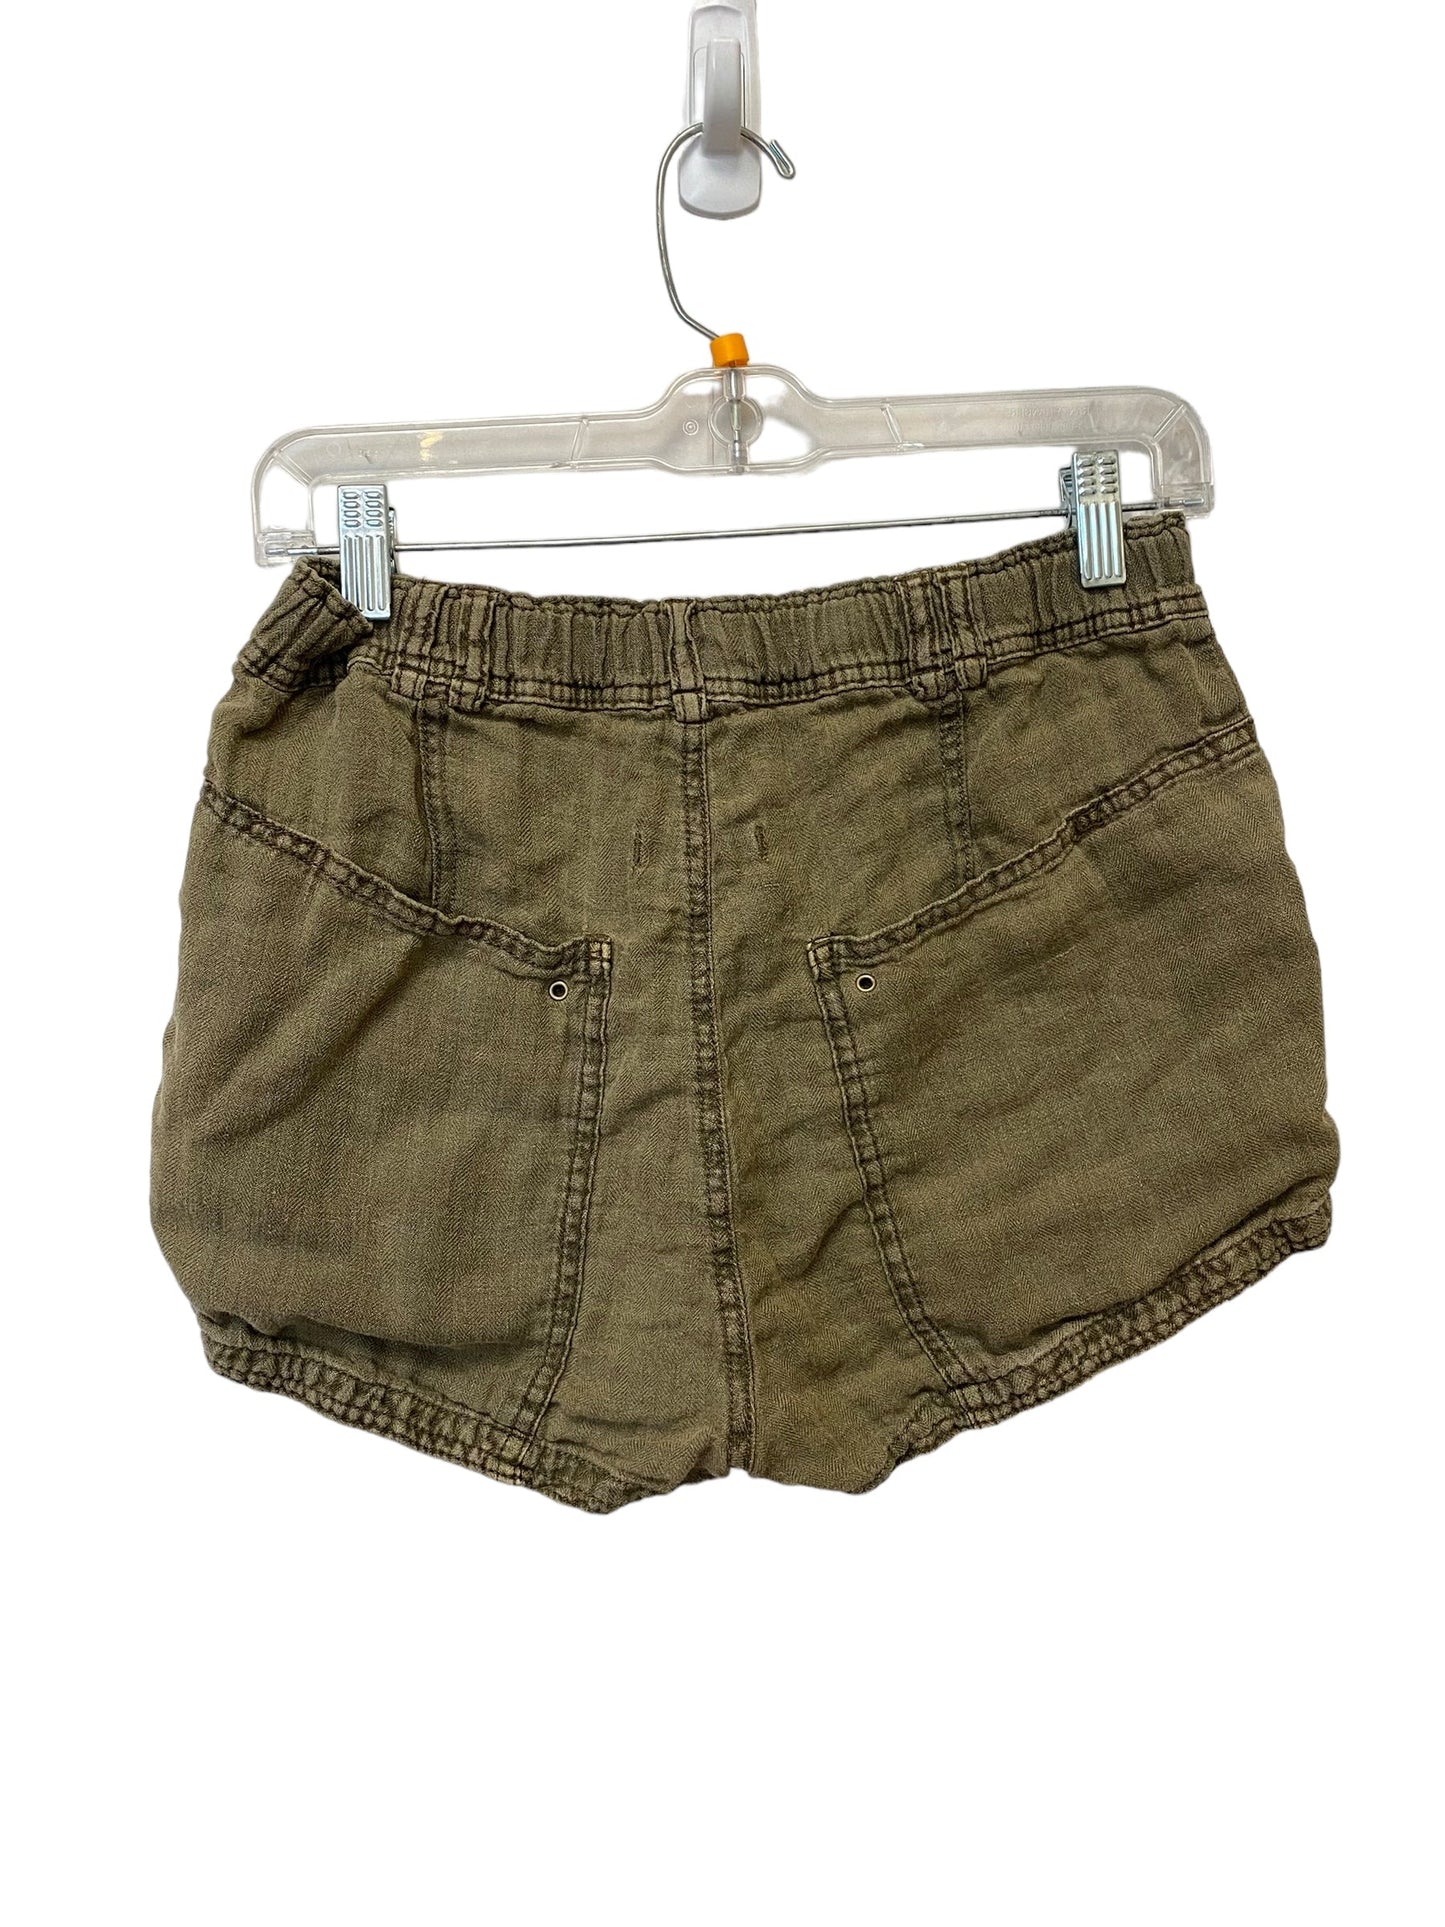 Green Shorts Free People, Size 4